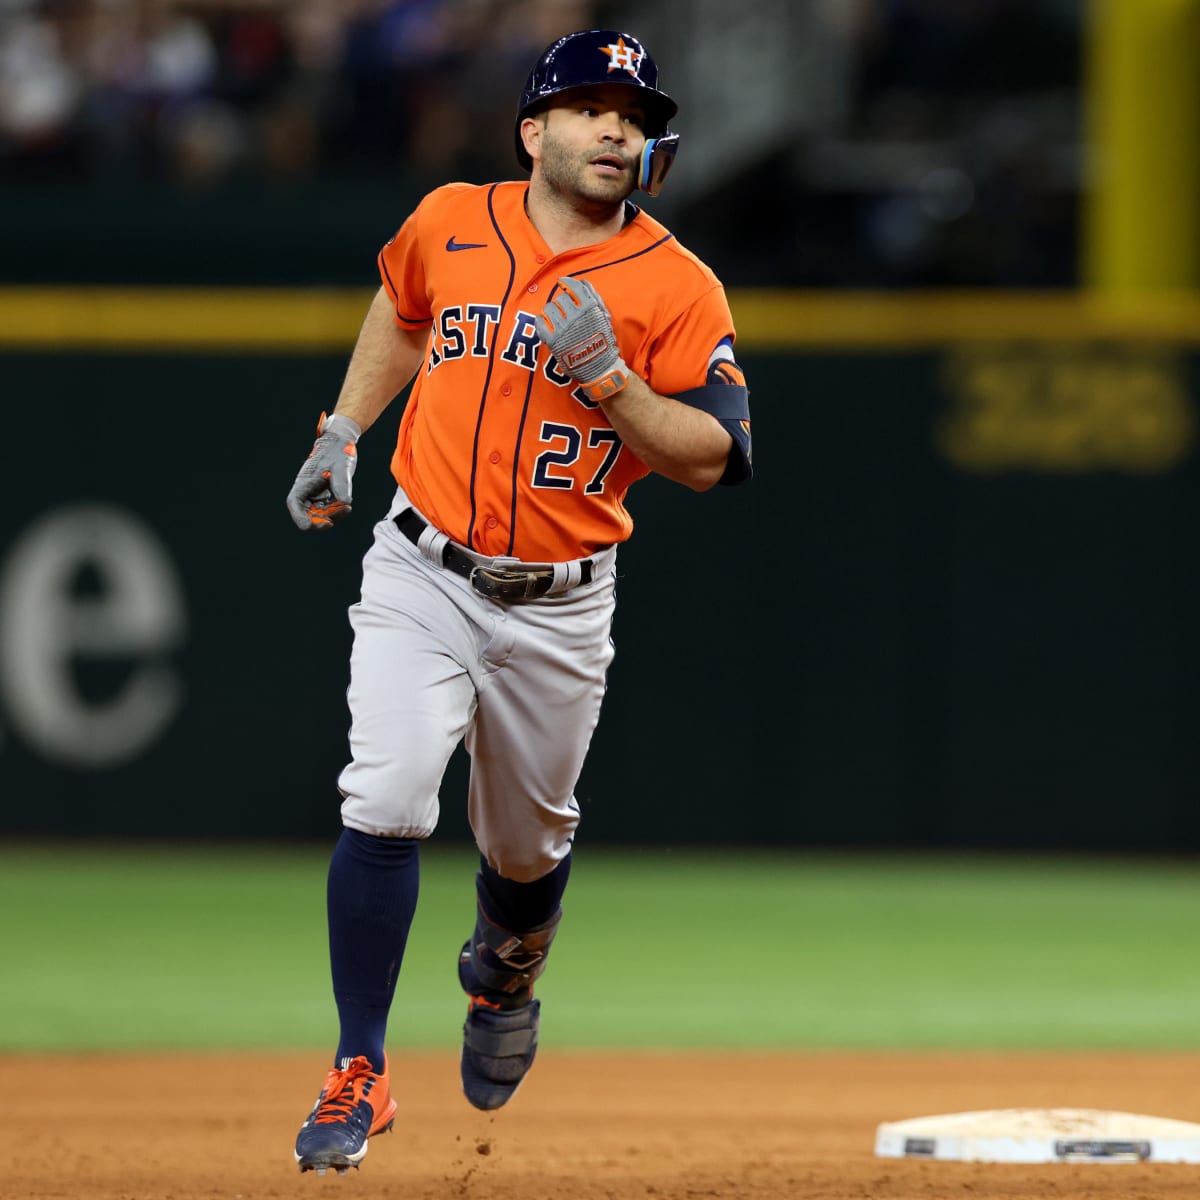 Altuve hits go-ahead homer in 9th, Astros take 3-2 lead over Rangers in  ALCS after benches clear